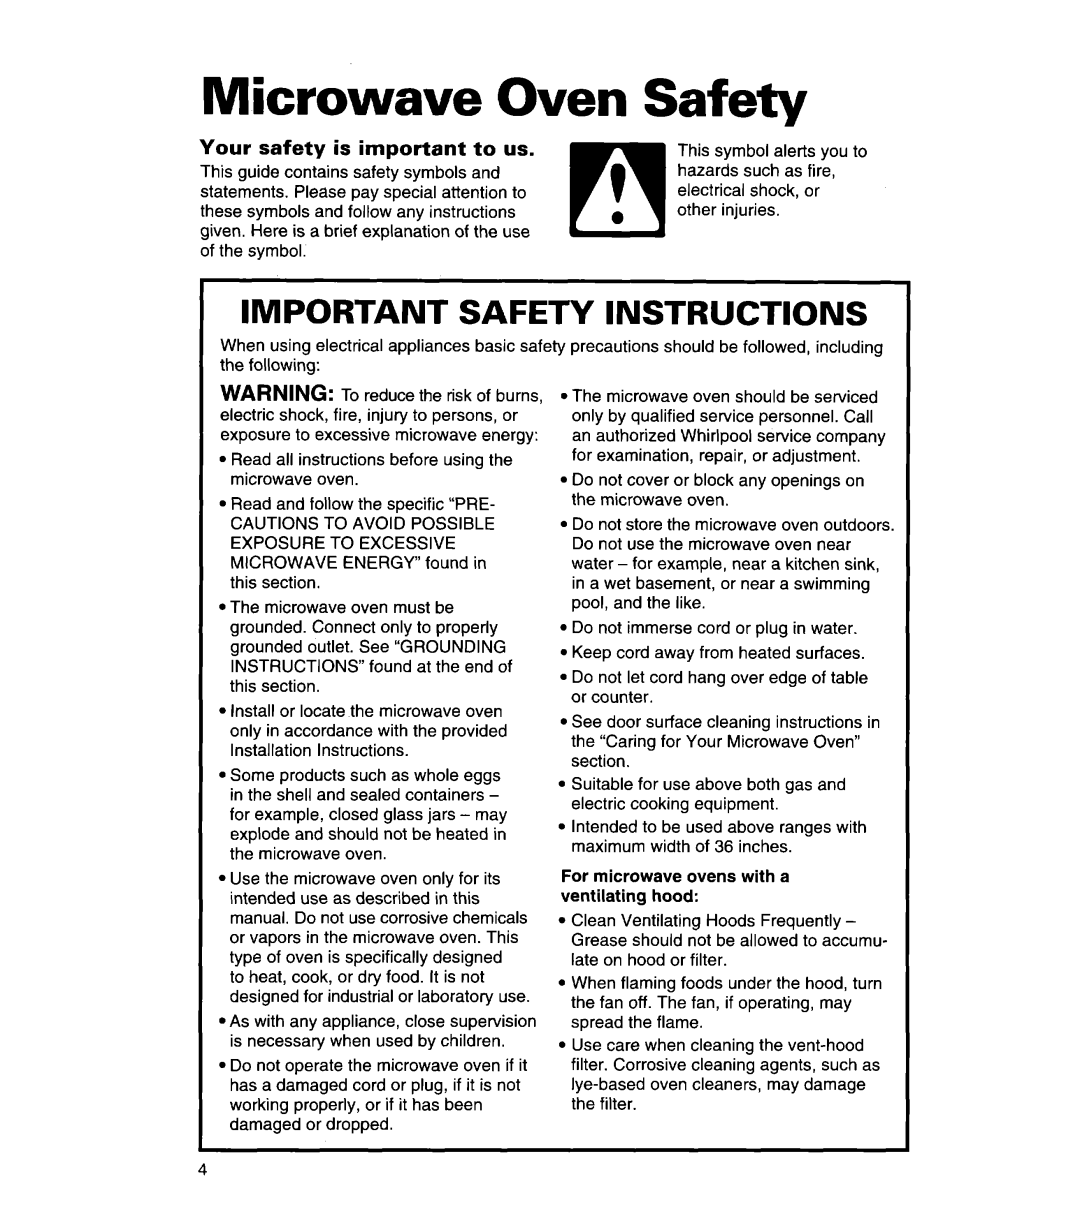 Whirlpool MH7130XE warranty Important Safety Instructions, Your safety is important to us 